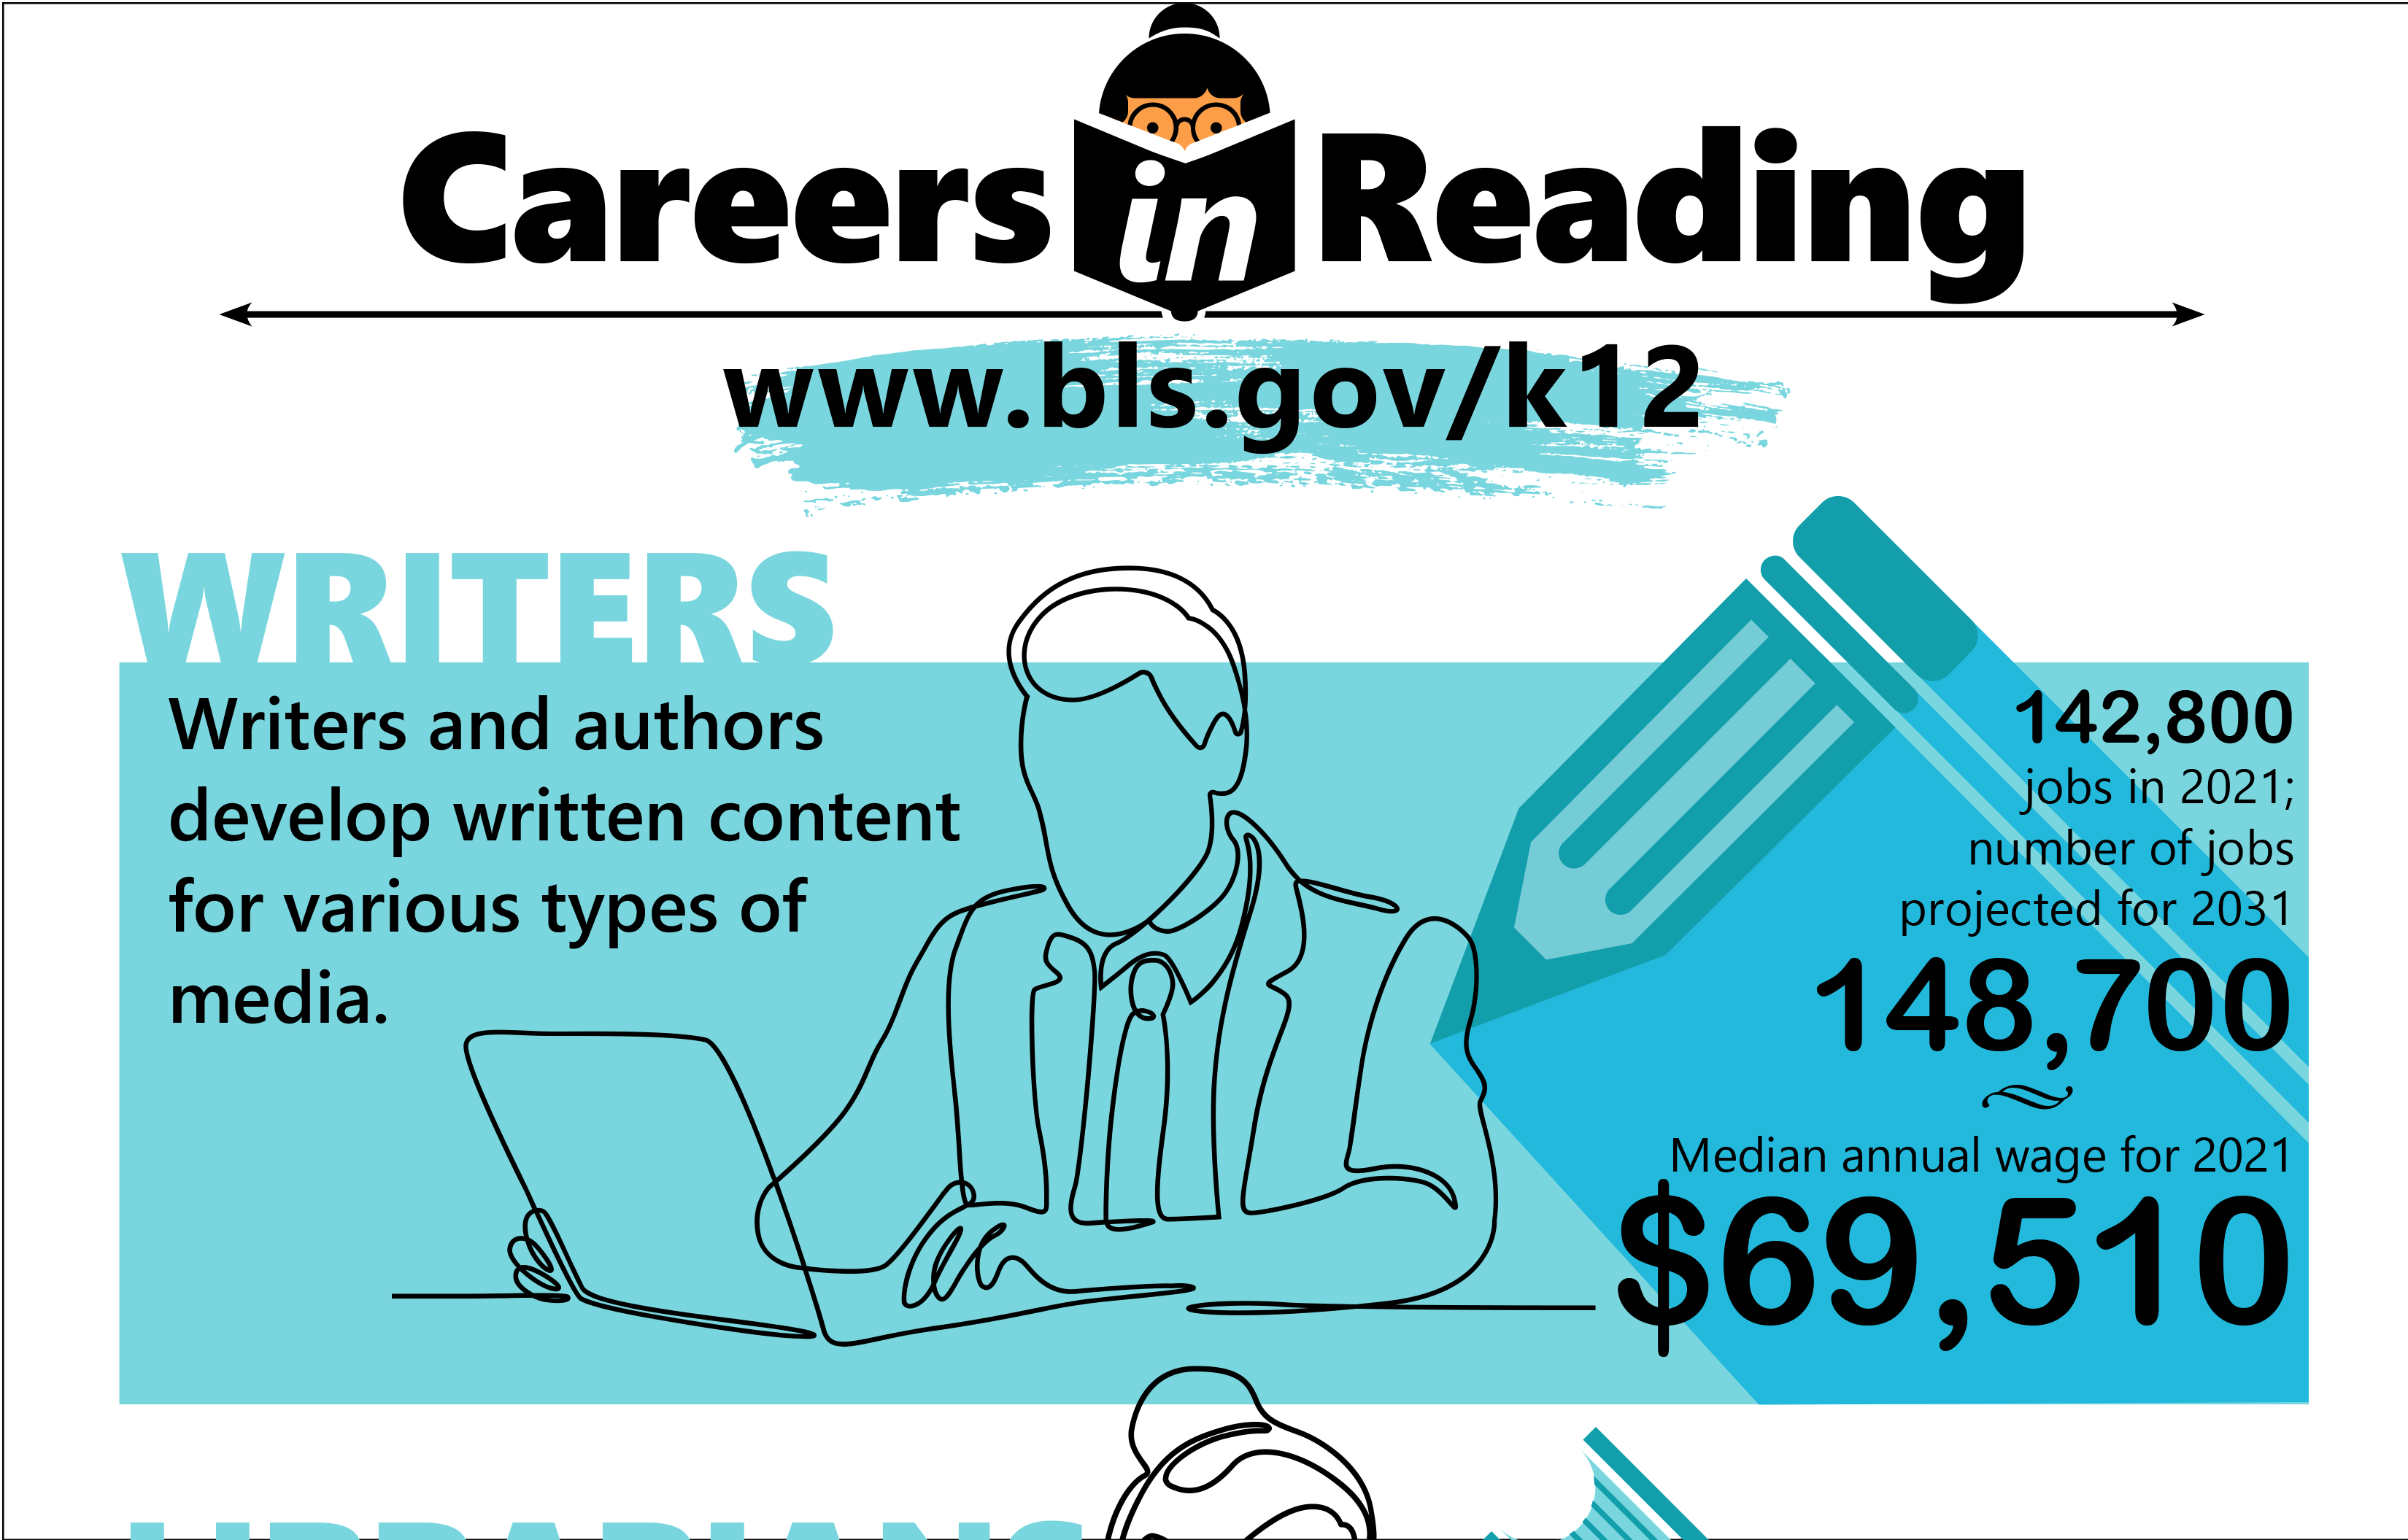 Careers in Reading